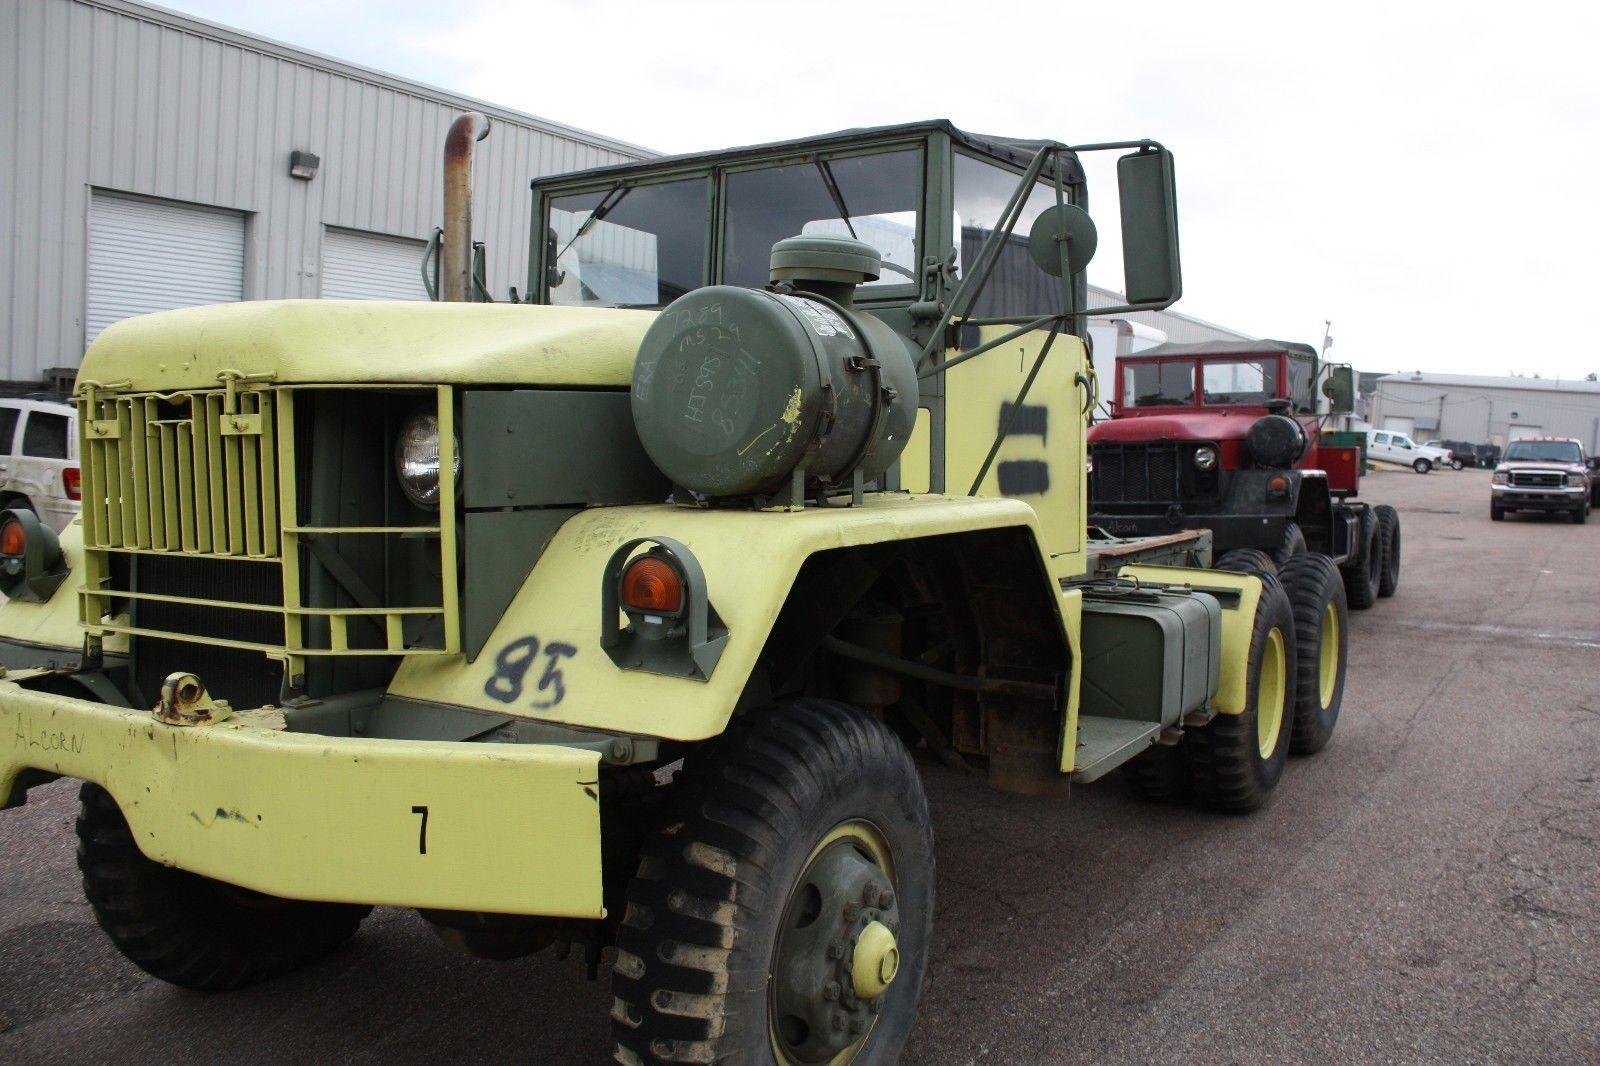 1970 Kaiser XM820 truck M32 military great running for sale. low miles 1985...